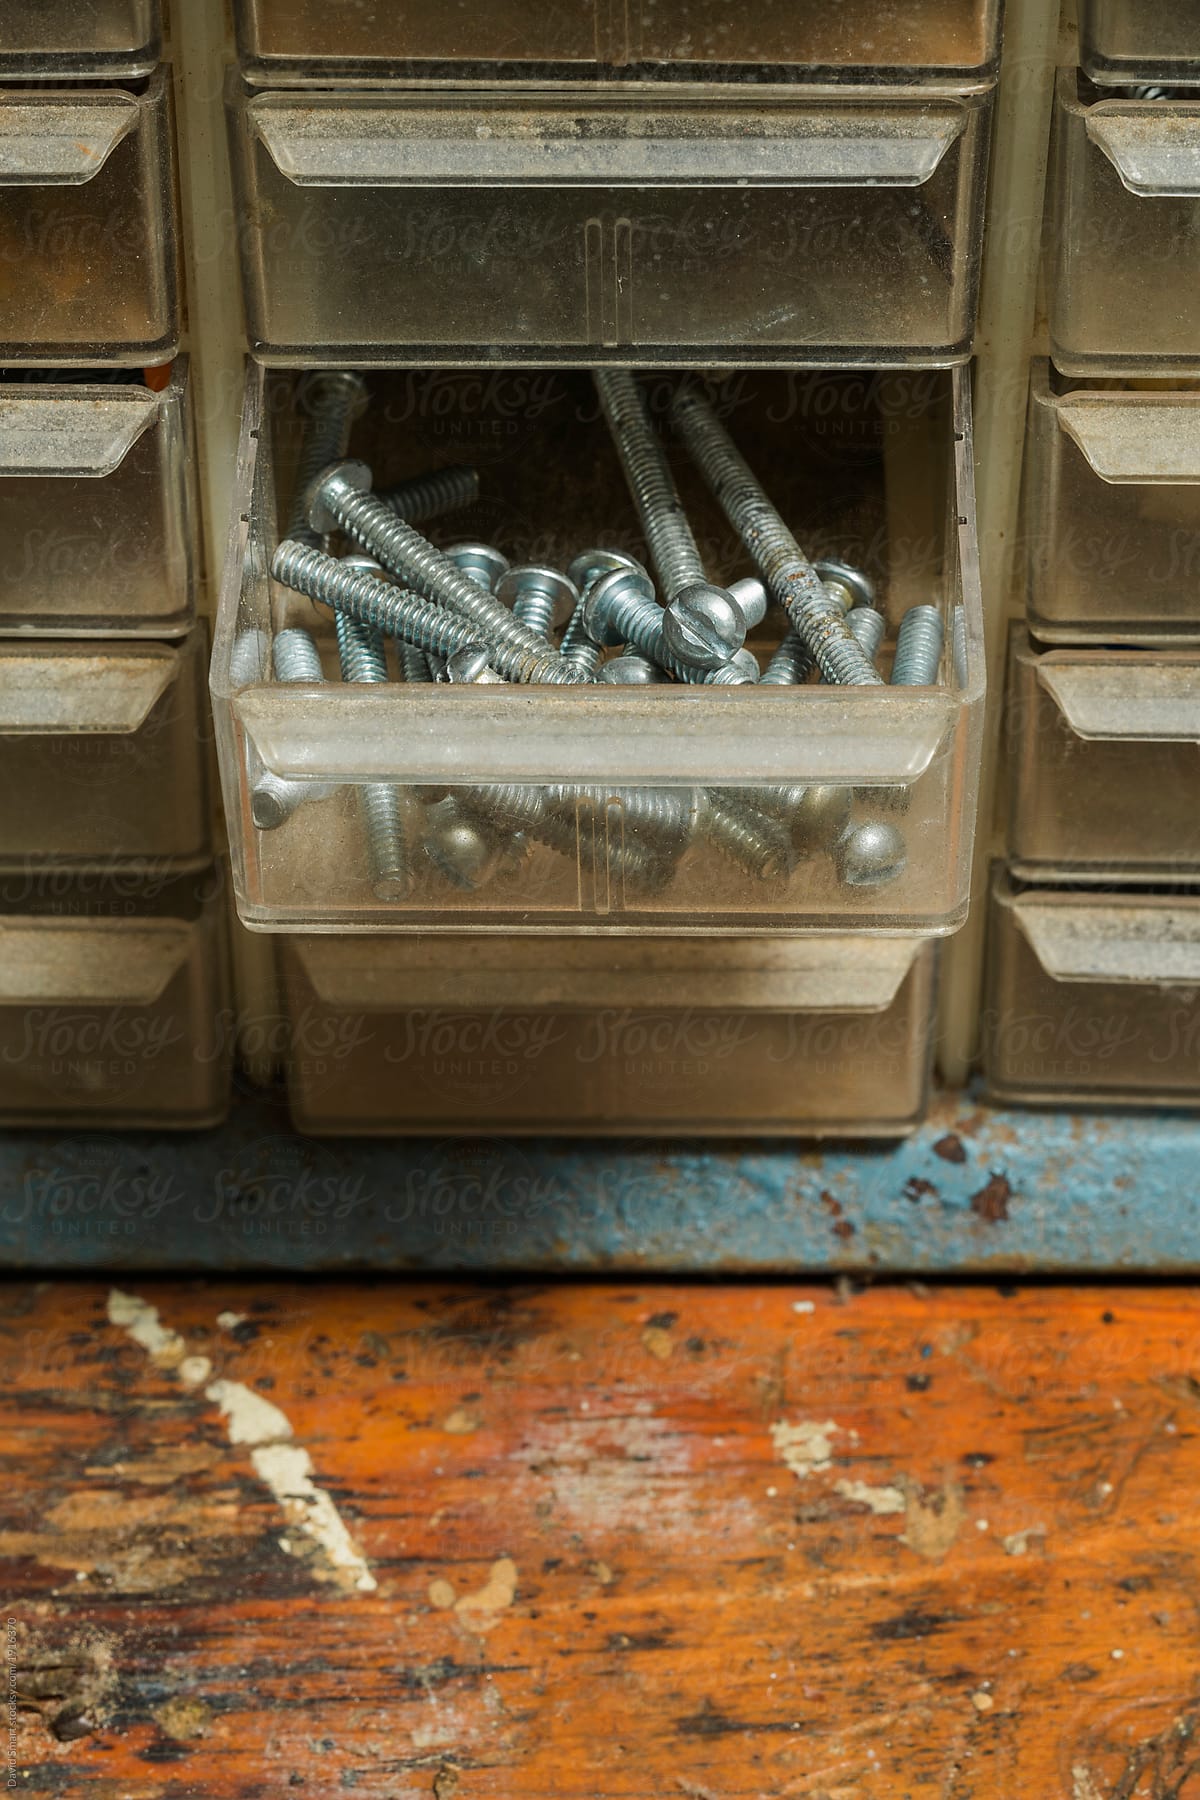 Open drawer of a small parts storage bin